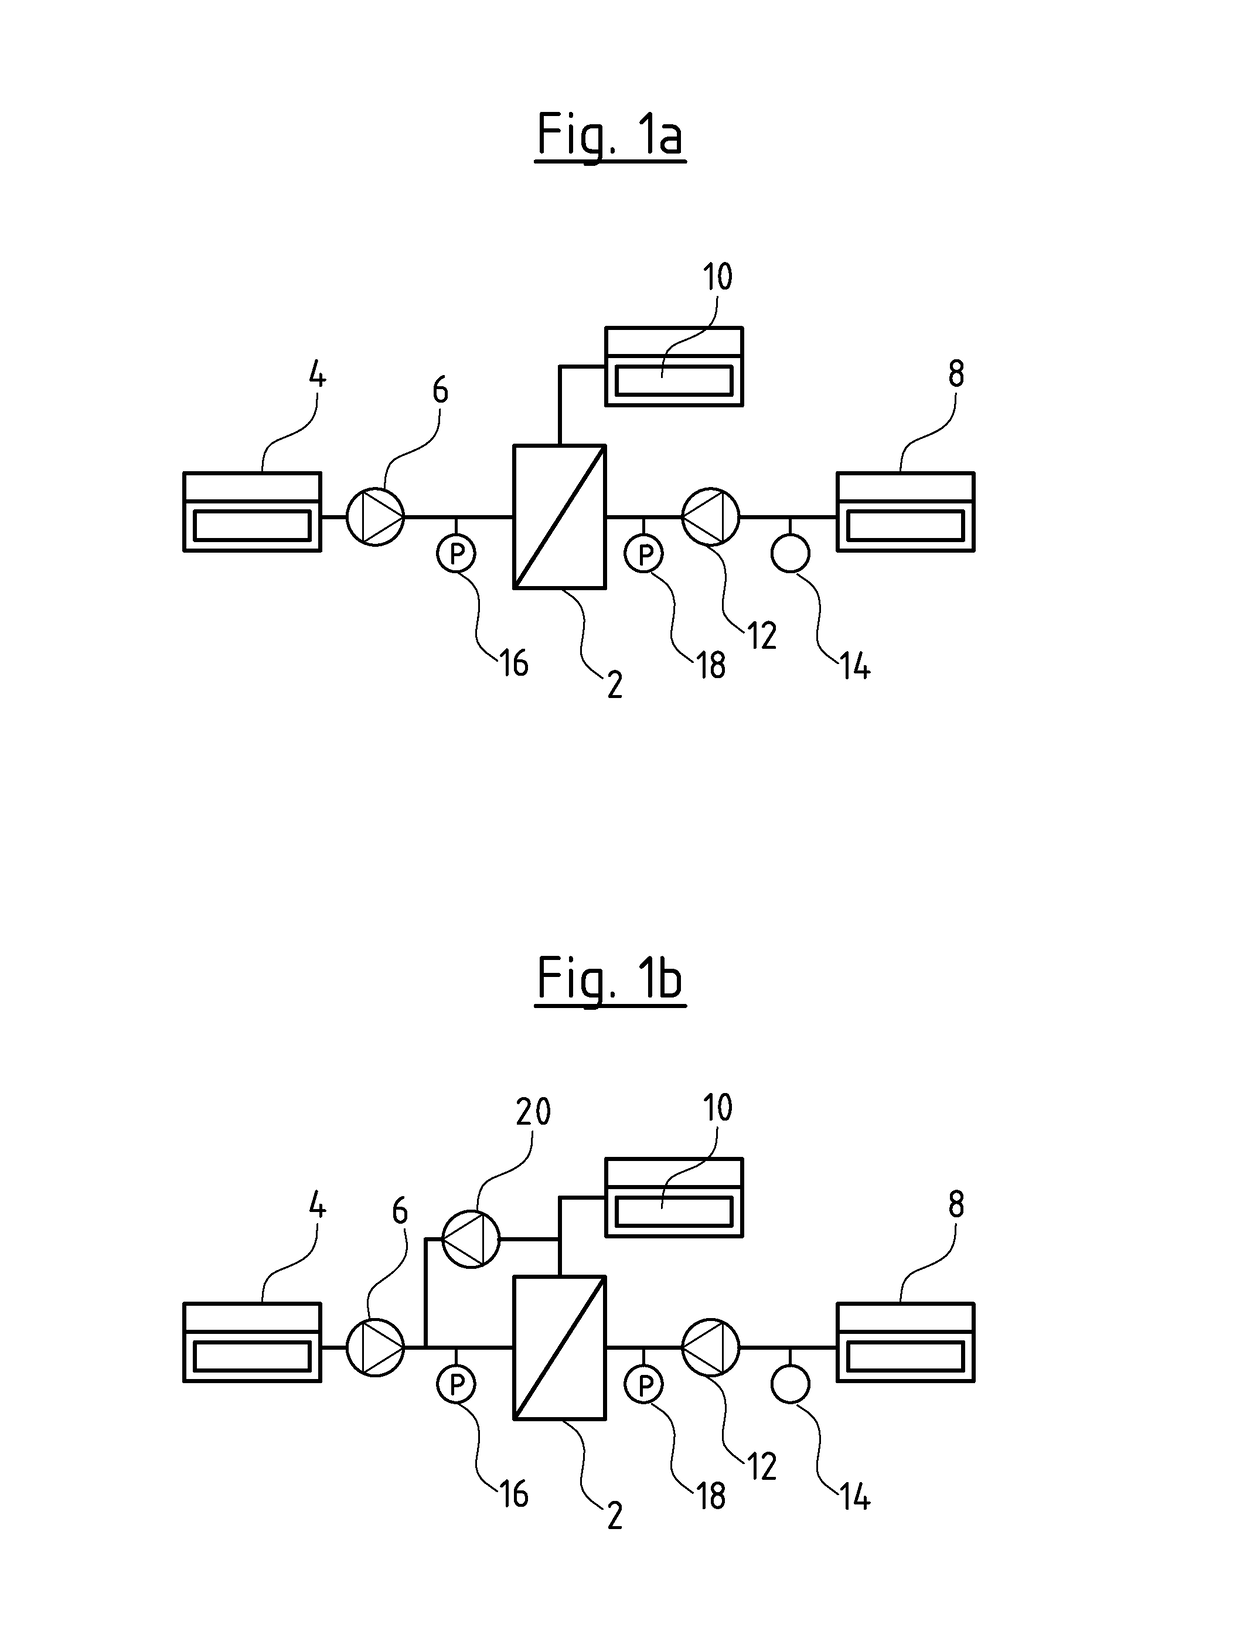 Control method for a filter system